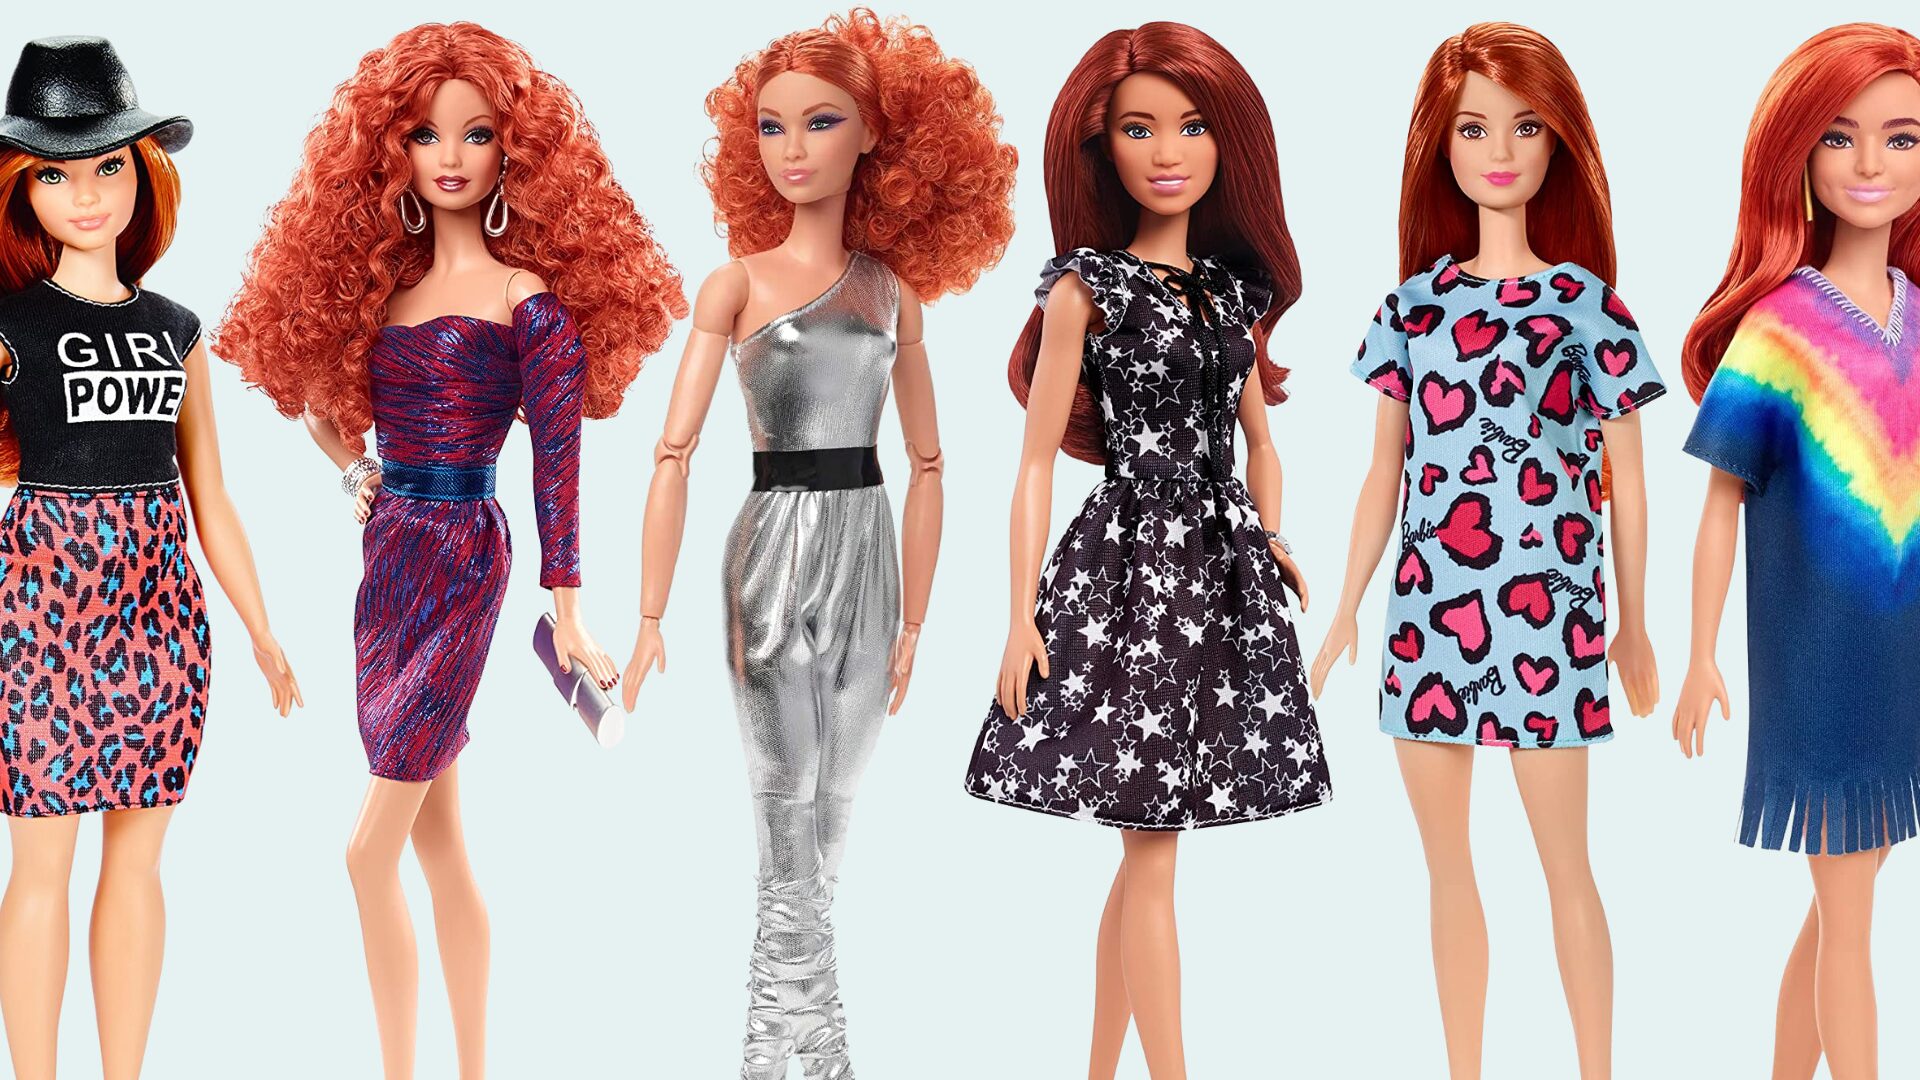 Top 17 Redhead Barbie Dolls You Need To Know About